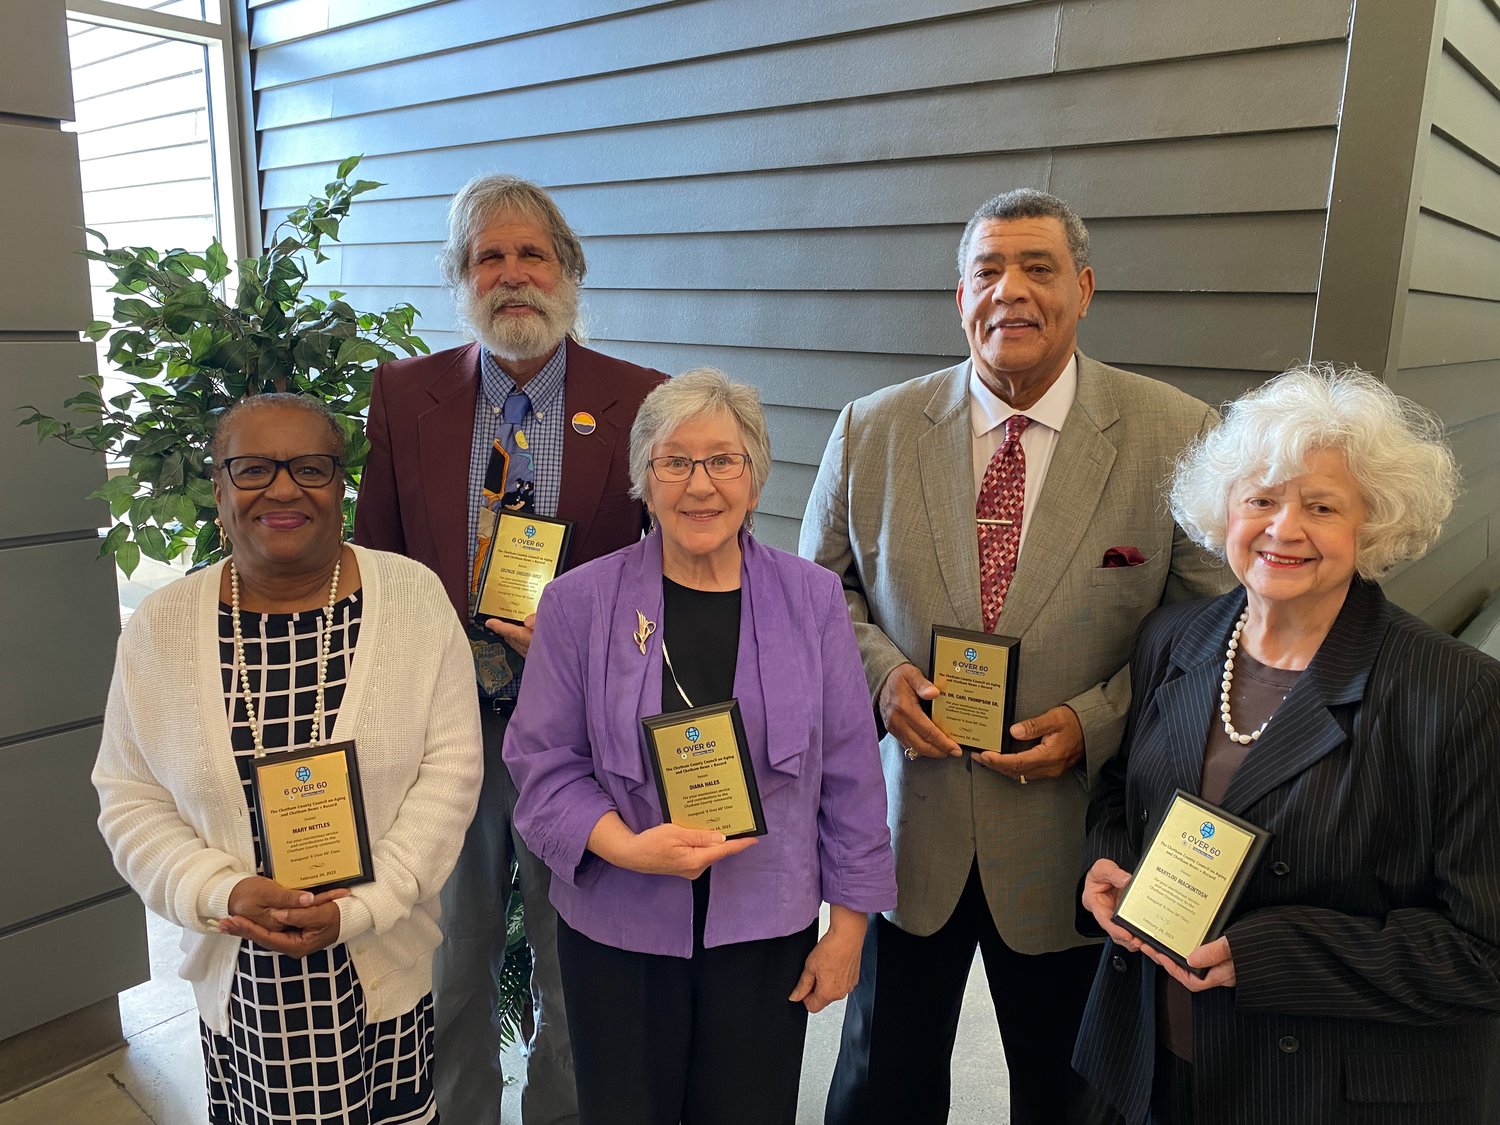 Honorees in the inaugural '6 Over 60' project included, from left, Mary Nettles, George Greger-Holt, Diana Hales, the Rev. Dr. Carl Thompson Sr. and Marylou Mackintosh. Not pictured is Genevieve Megginson. '6 Over 60' is a joint project of the Chatham Council on Aging and the News + Record.